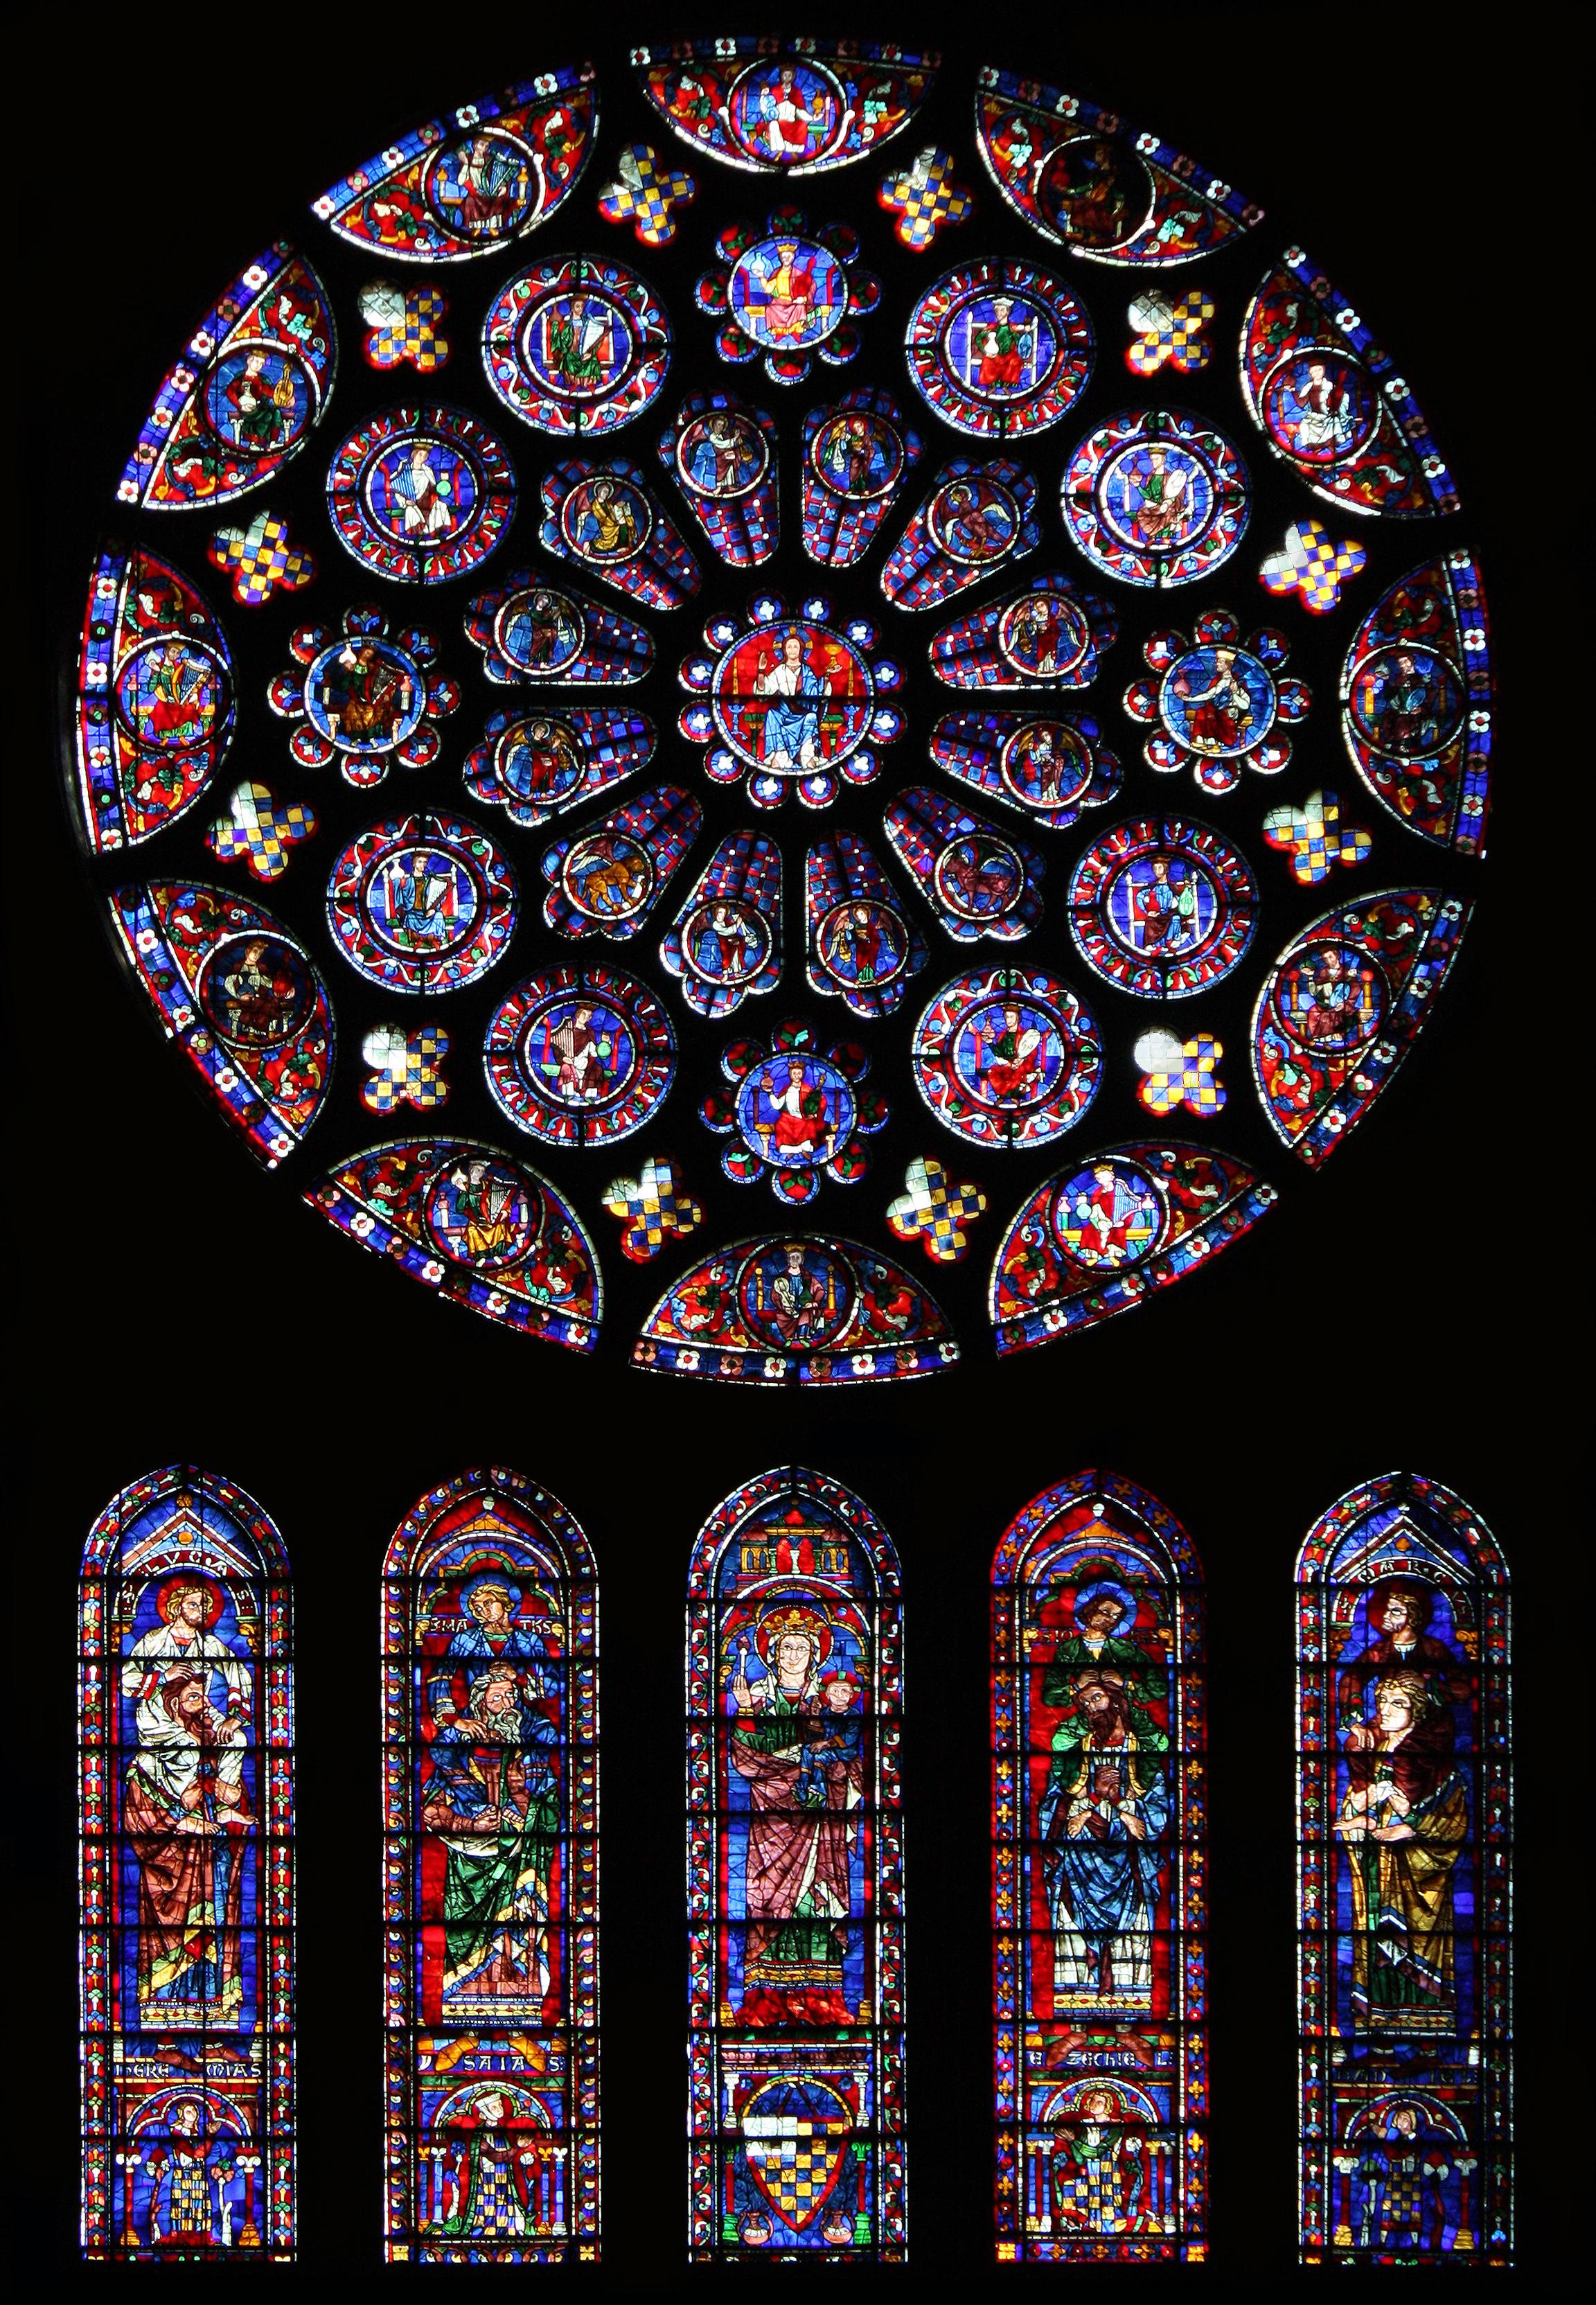 South rose window of Chartres Cathedral01